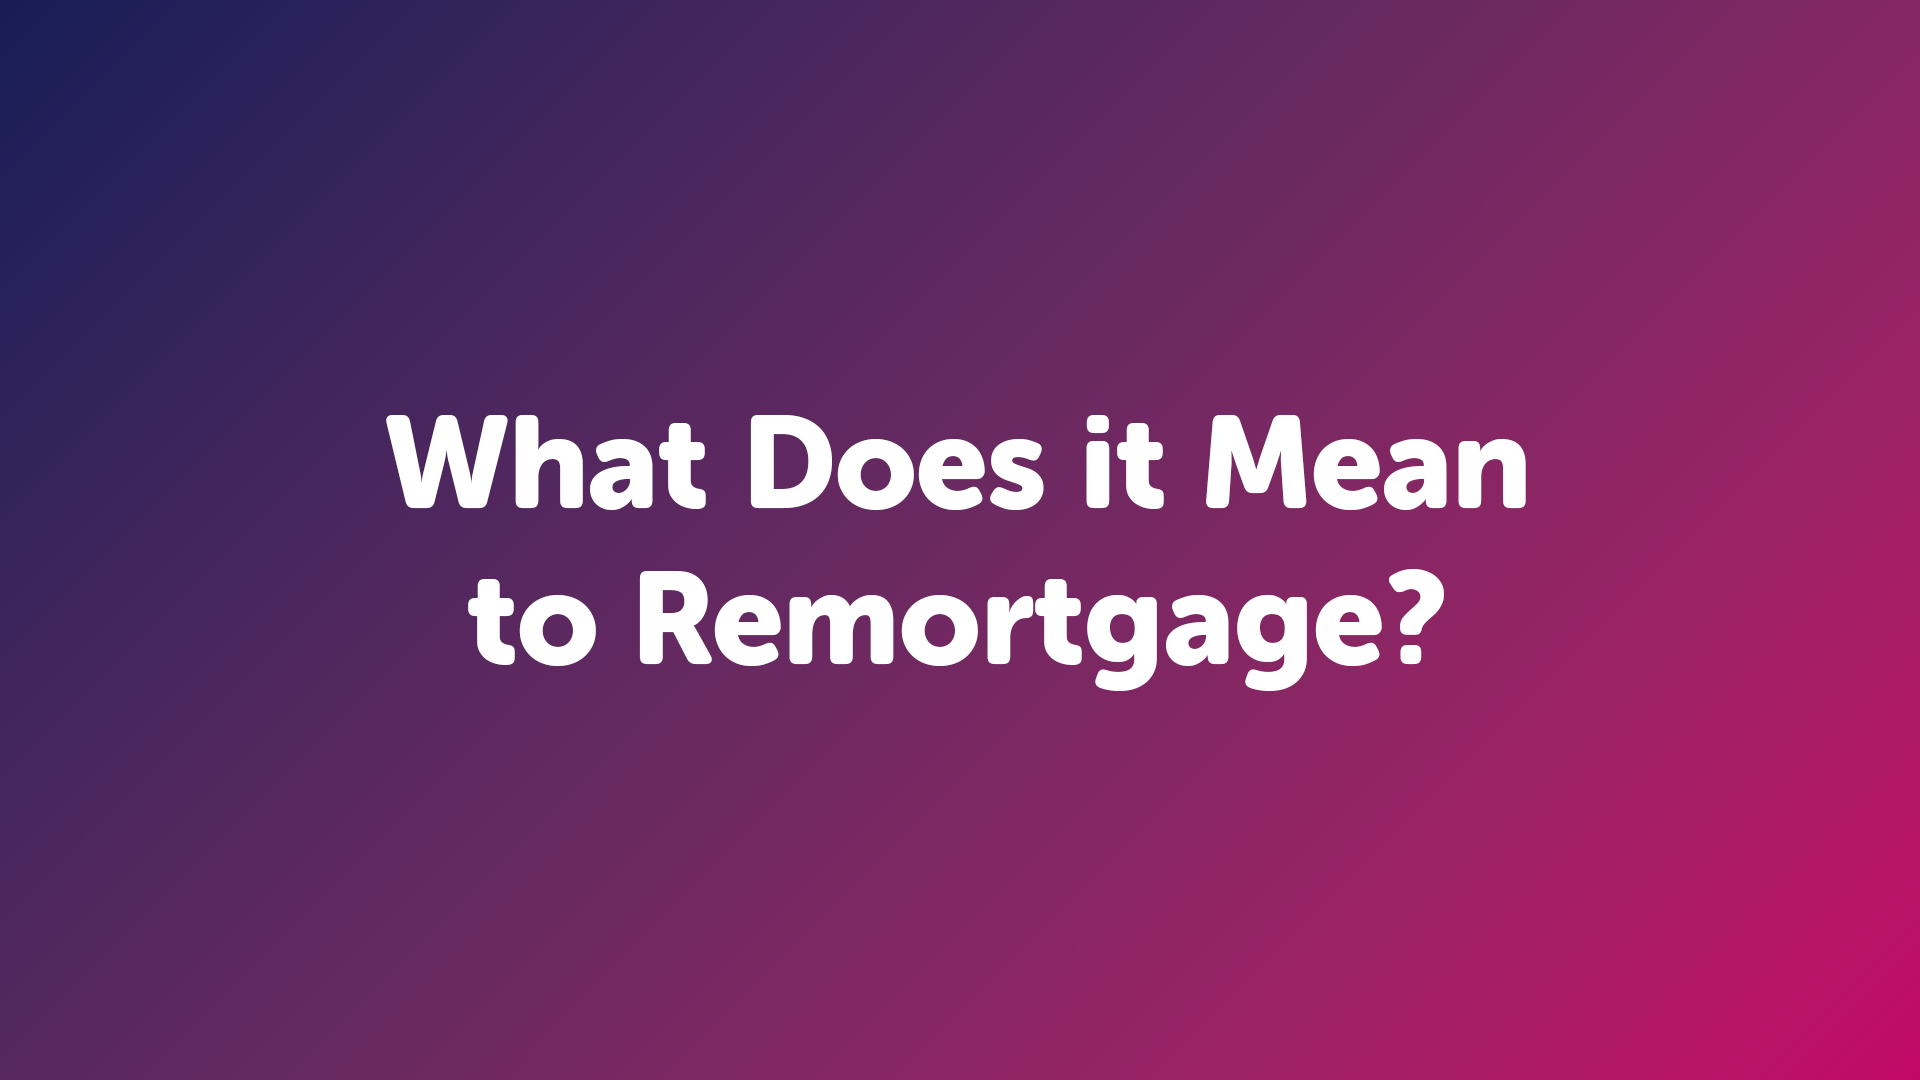 What Does it Mean to Remortgage?